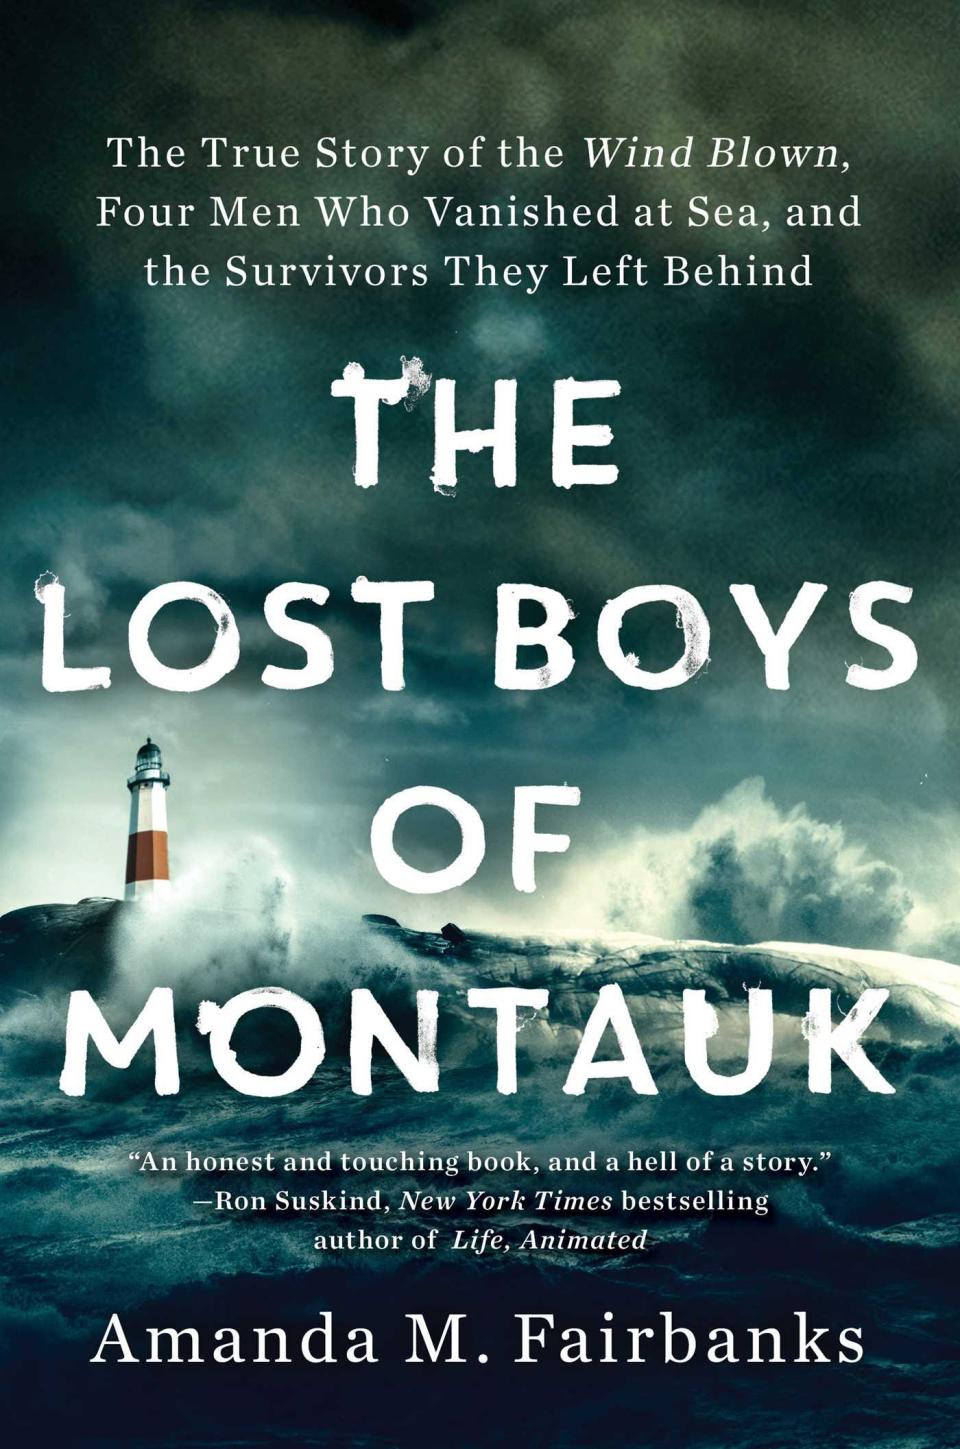 Amanda M. Fairbanks, author of “The Lost Boys of Montauk: The True Story of the Wind Blown, Four Men Who Vanished at Sea, and the Survivors They Left Behind,” will speak in the Nonfiction Series for the Friends of the Library of Collier County on March 18, 2024.